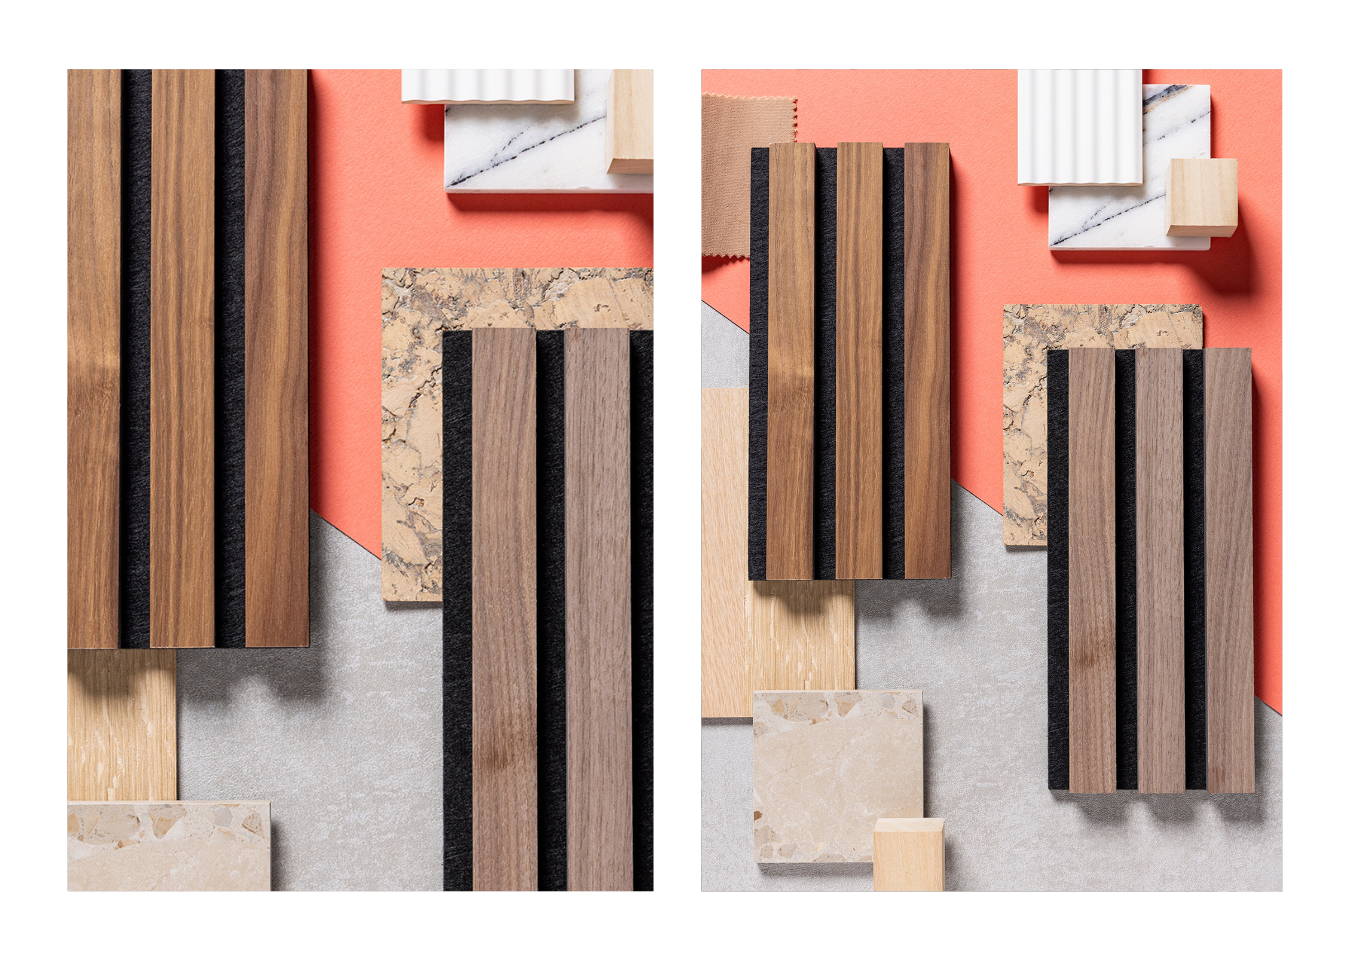 SlatWall Walnut and Deep Walnut sample board for interiors featuring coal, white and neutral shades, and stone finishes.